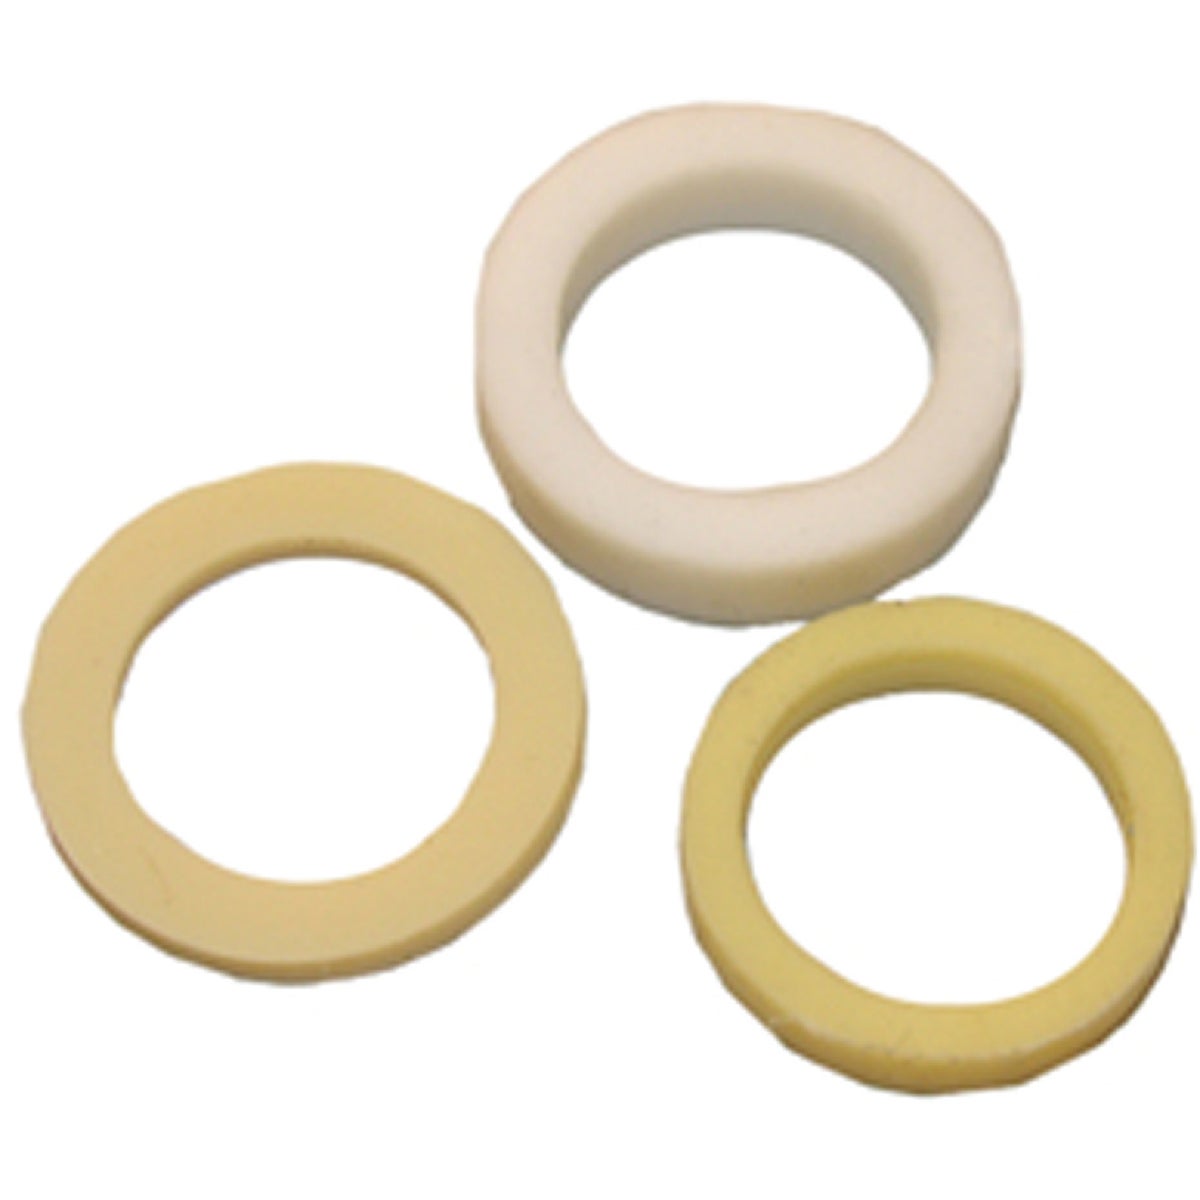 Lasco Assorted Faucet Aerator Washer (3-Pieces)